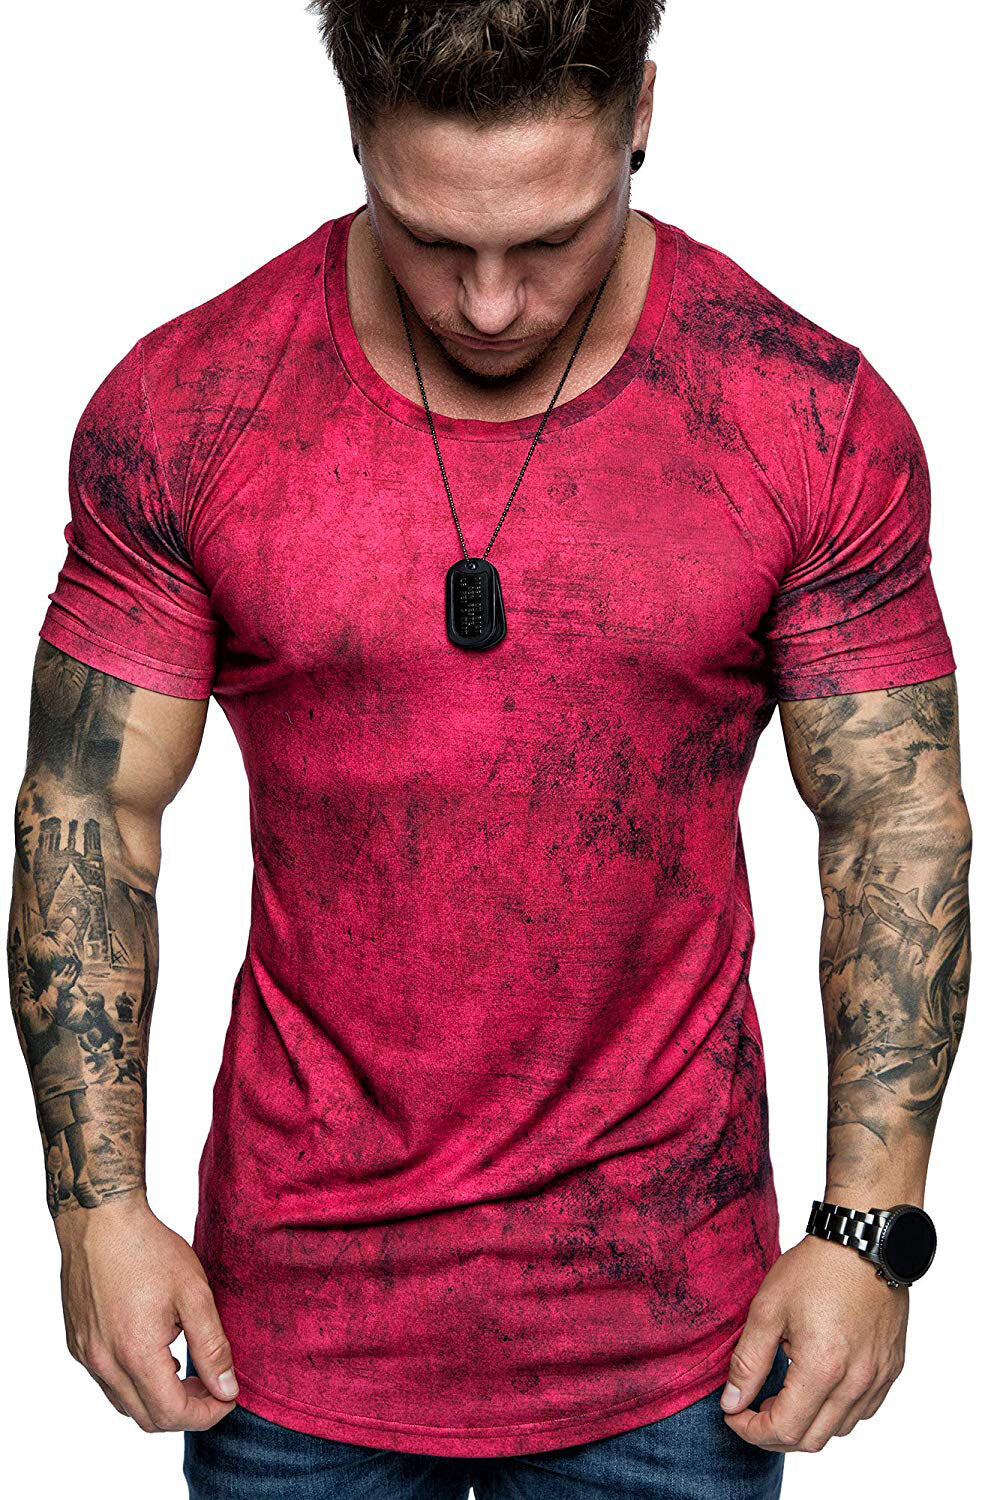 Summer Casual Short Sleeve T-shirt for men Breathable Quick-Dry Fitness Casual Shirts